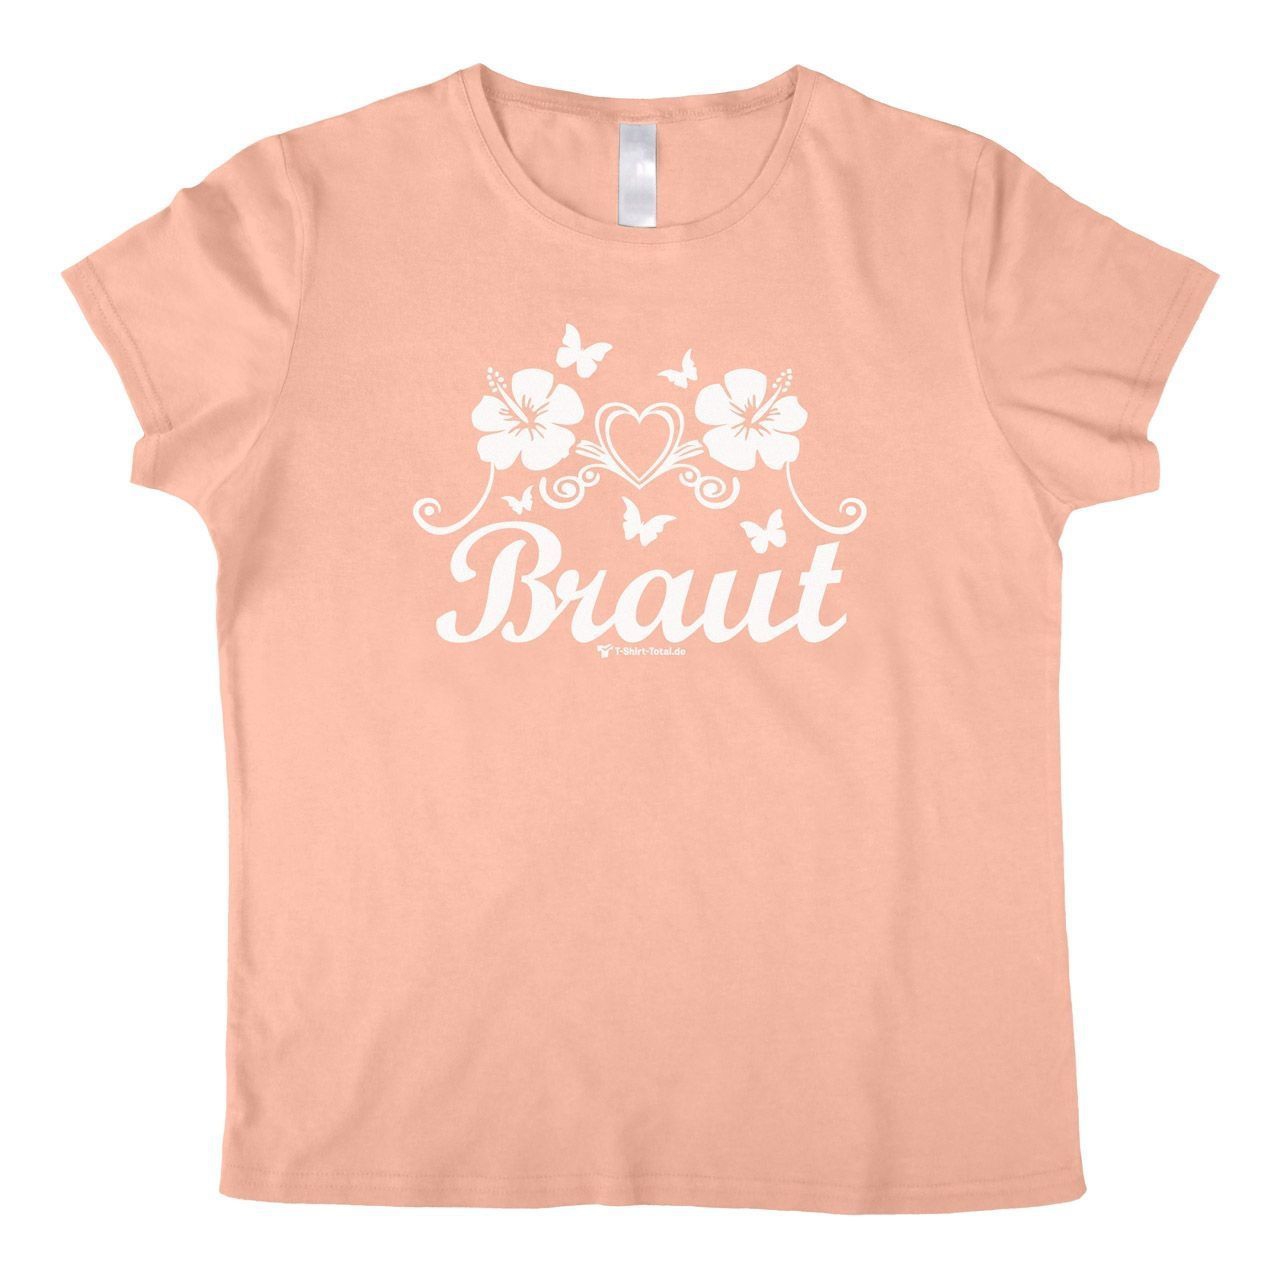 Die Braut Woman T-Shirt rosa Extra Large